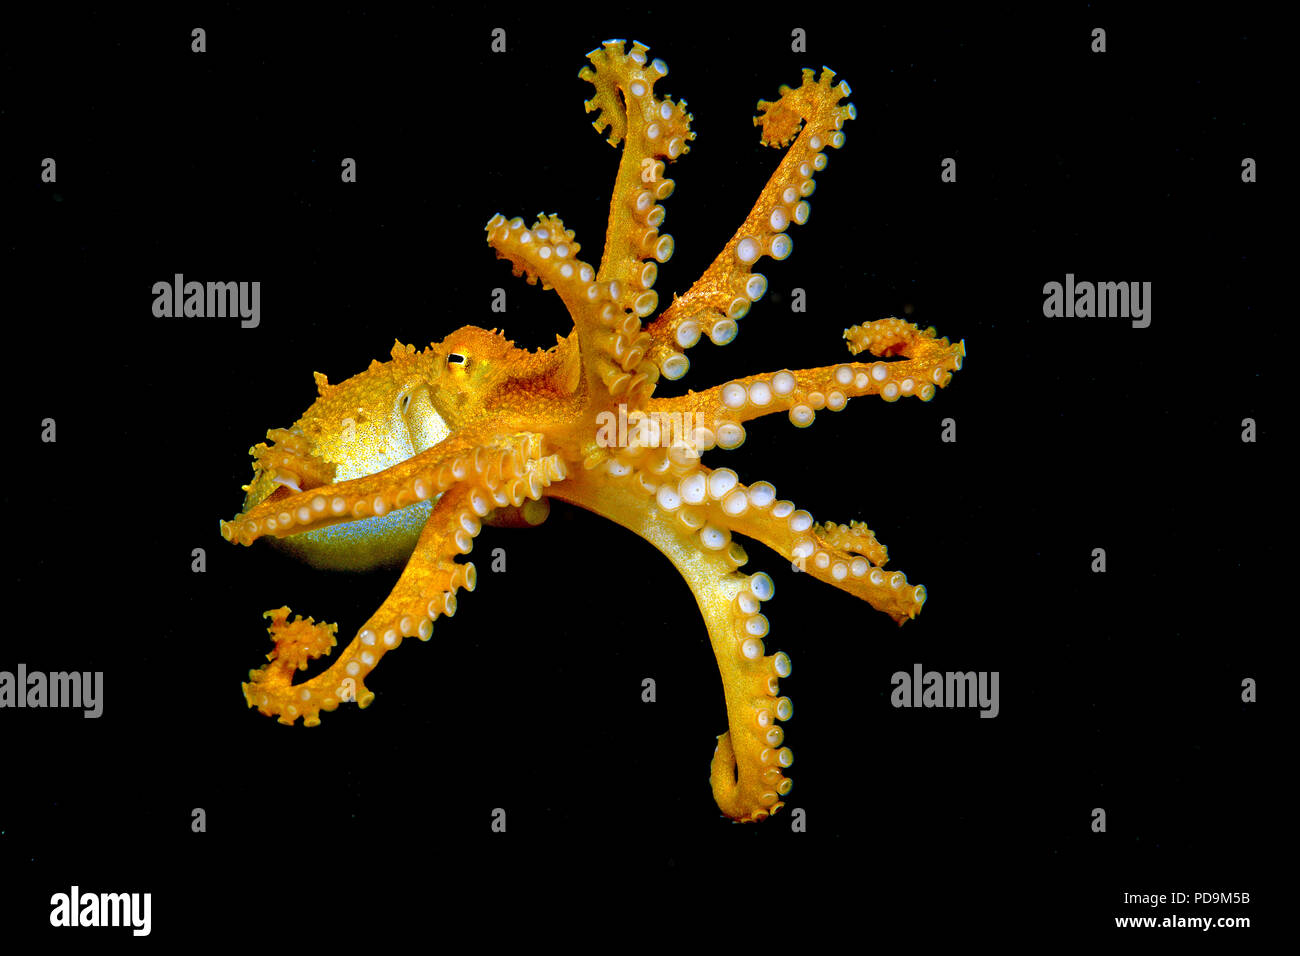 Image result for yellow octopus PHOTOS